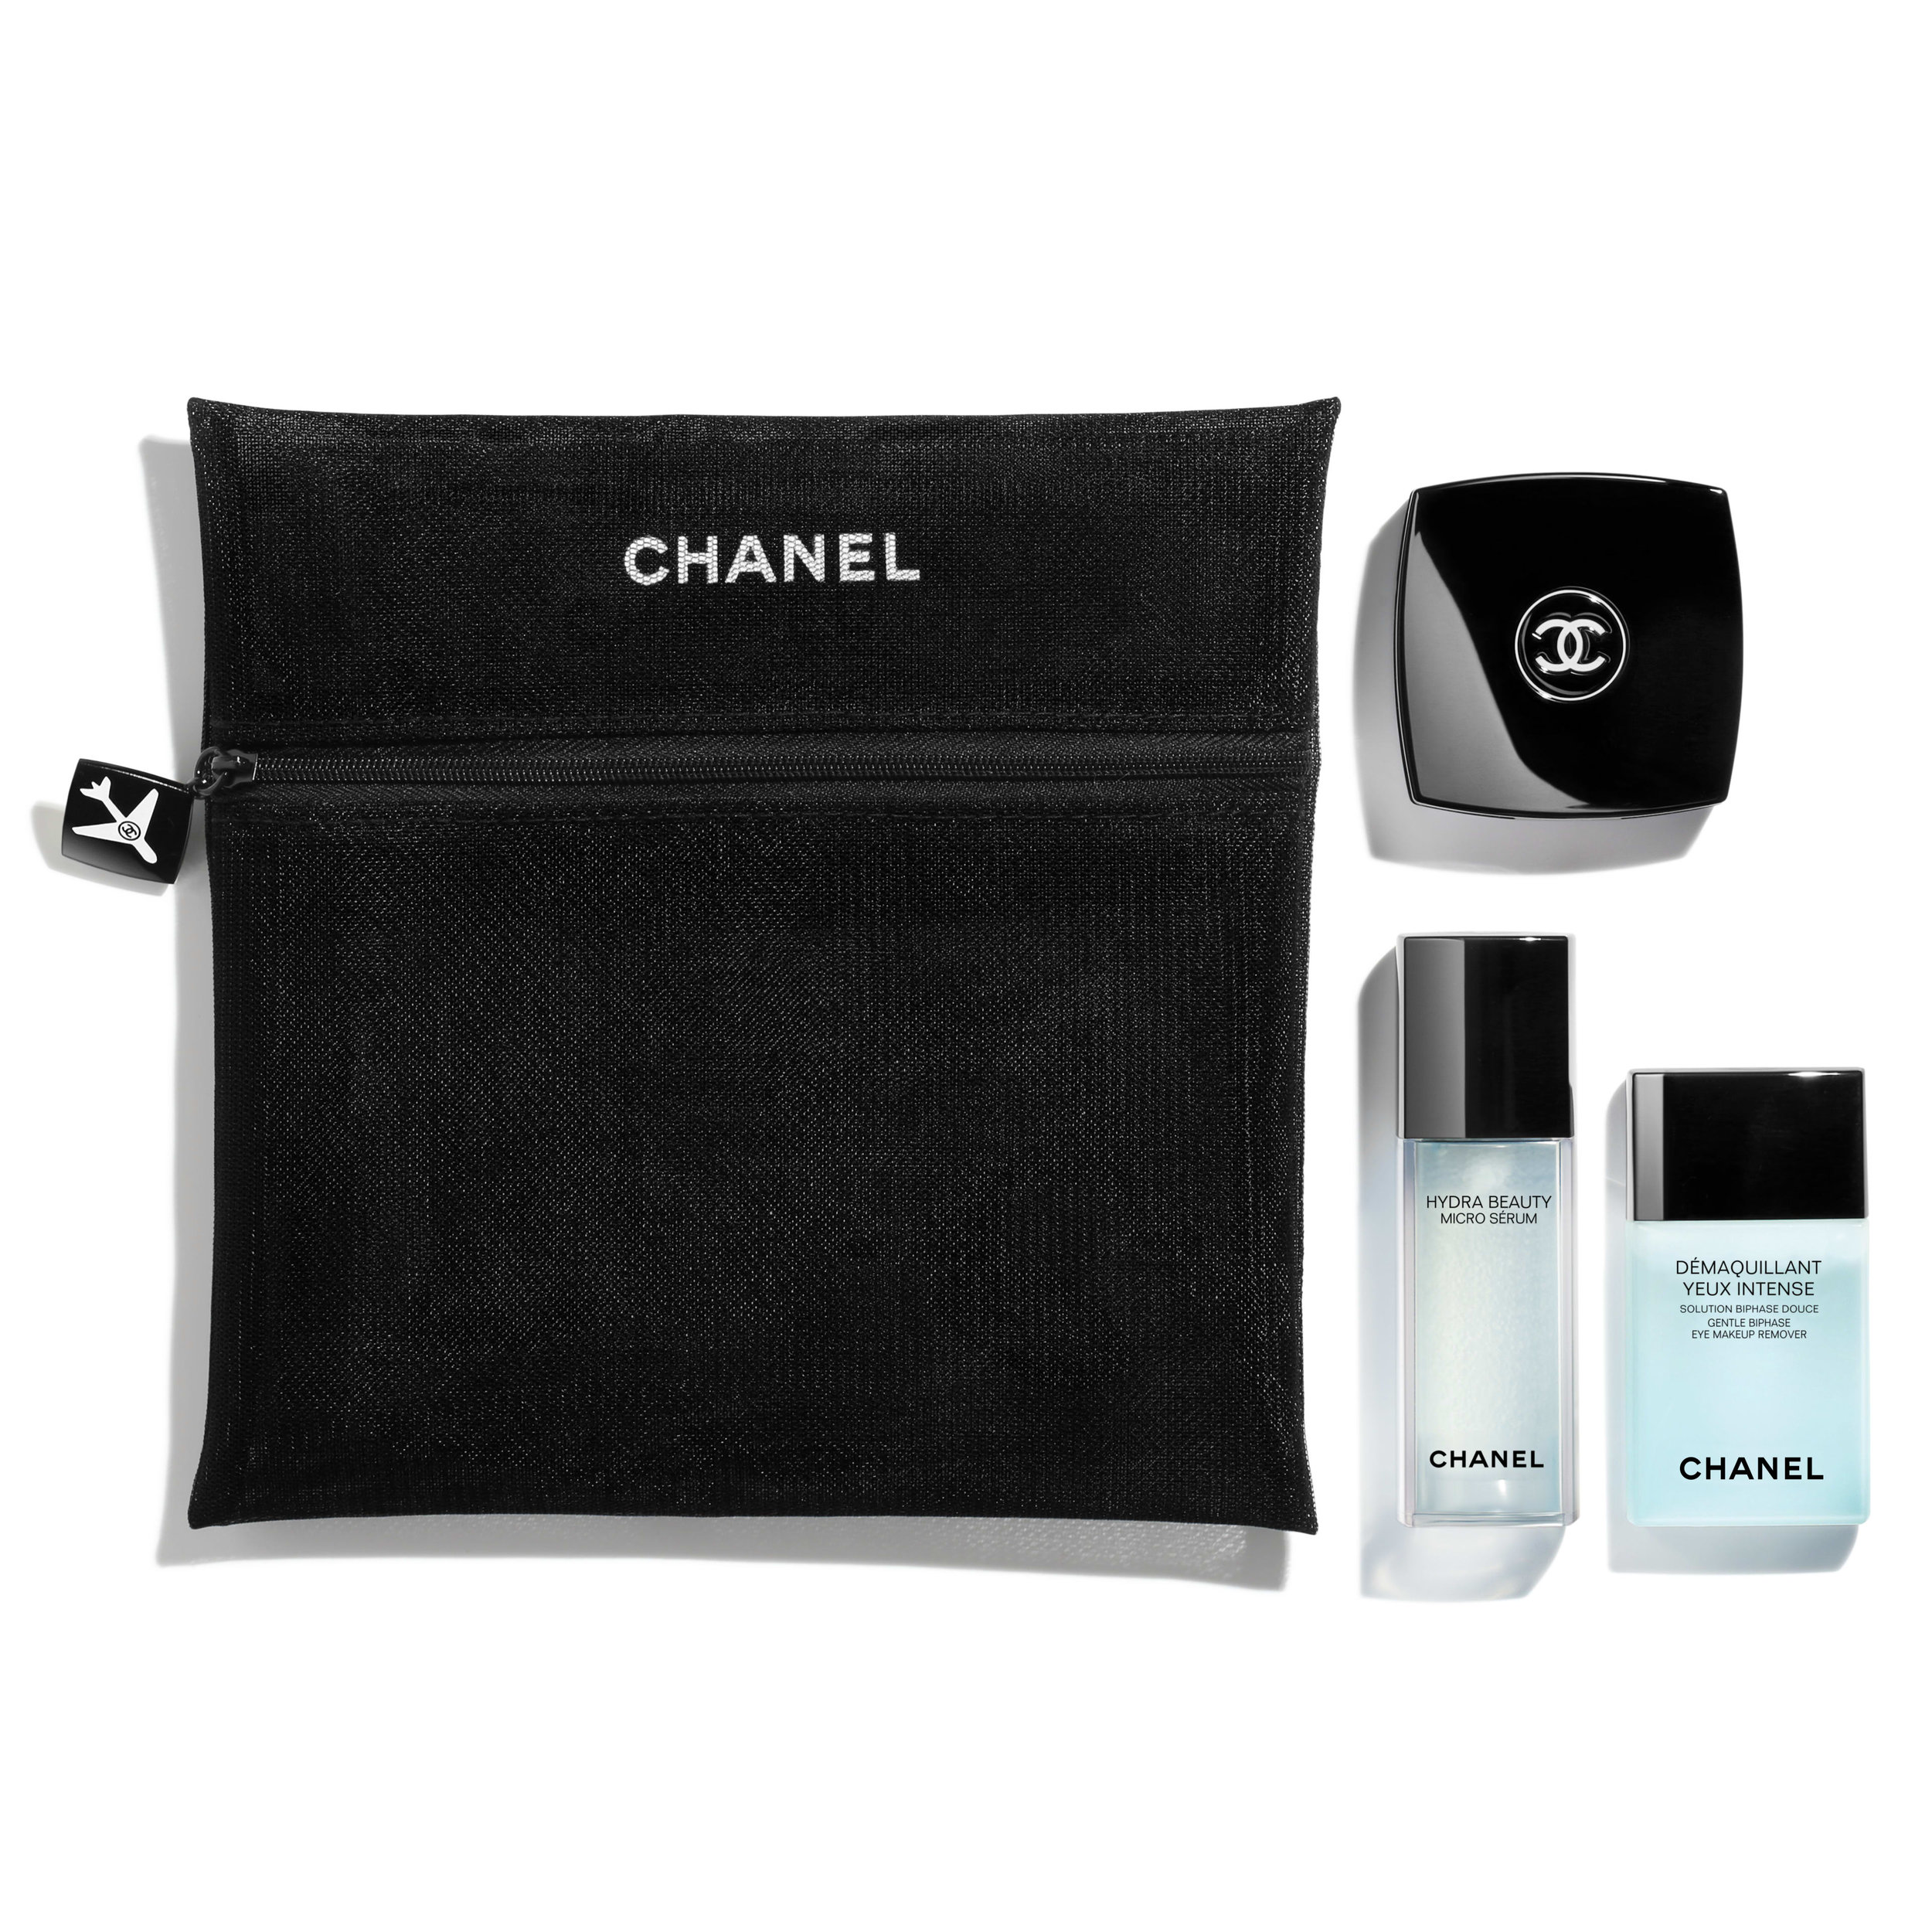 Chanel Travel Set is the Couture Skin Saviour